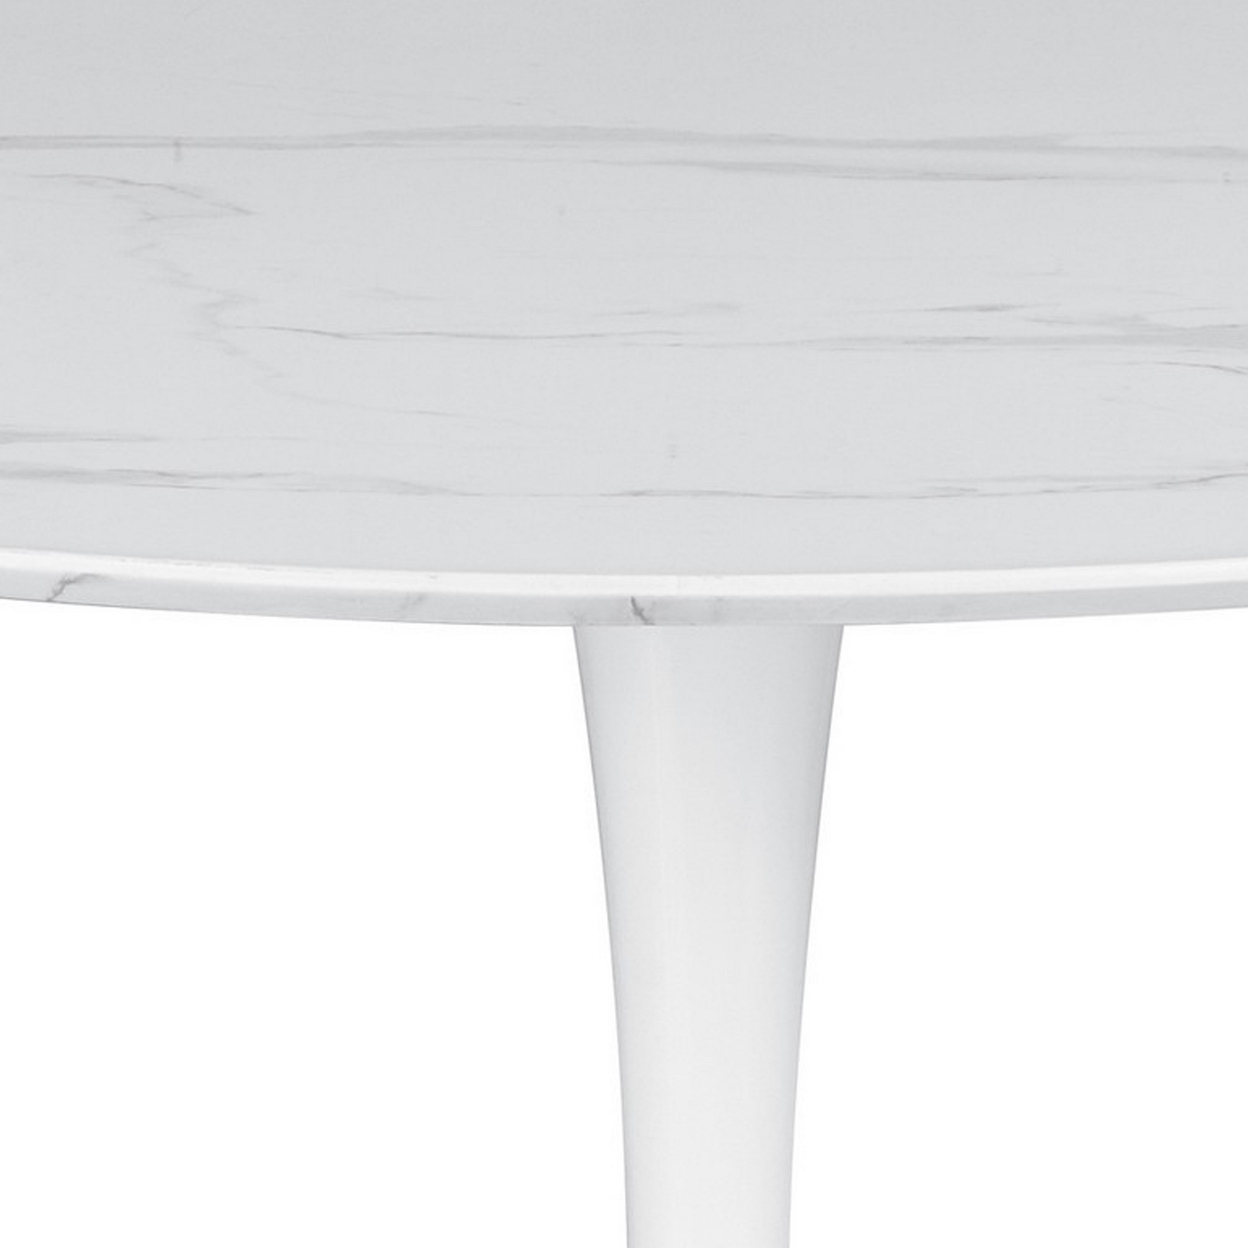 Loxi 40 Inch Round Dining Table, White Faux Marble Top, Tulip Accent Body- Saltoro Sherpi